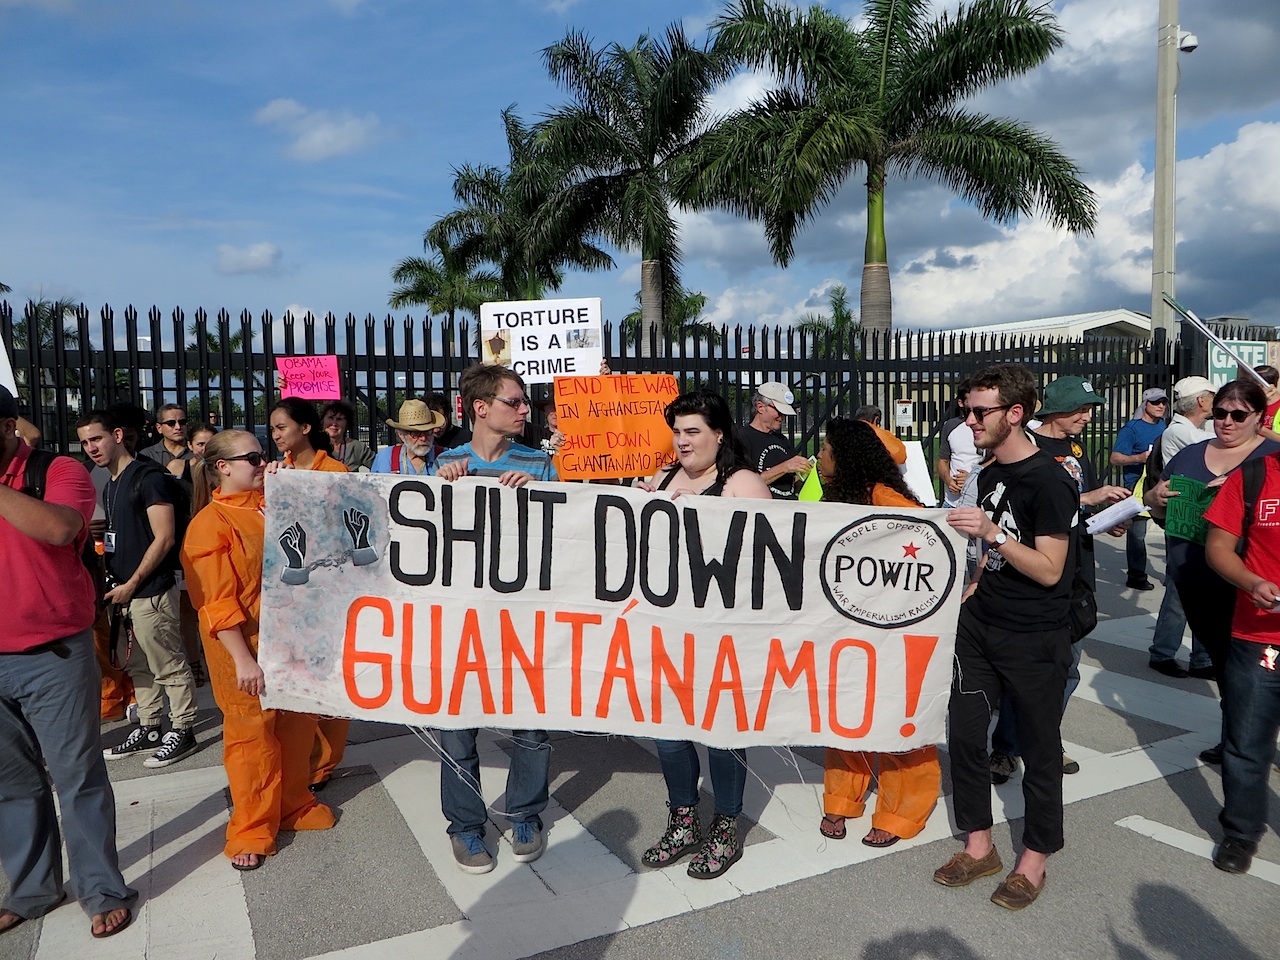 Campaigners in Florida call for the closure of Guantanamo outside the gates of US Southern Command, January 9, 2016 (Photo: Andy Worthington).